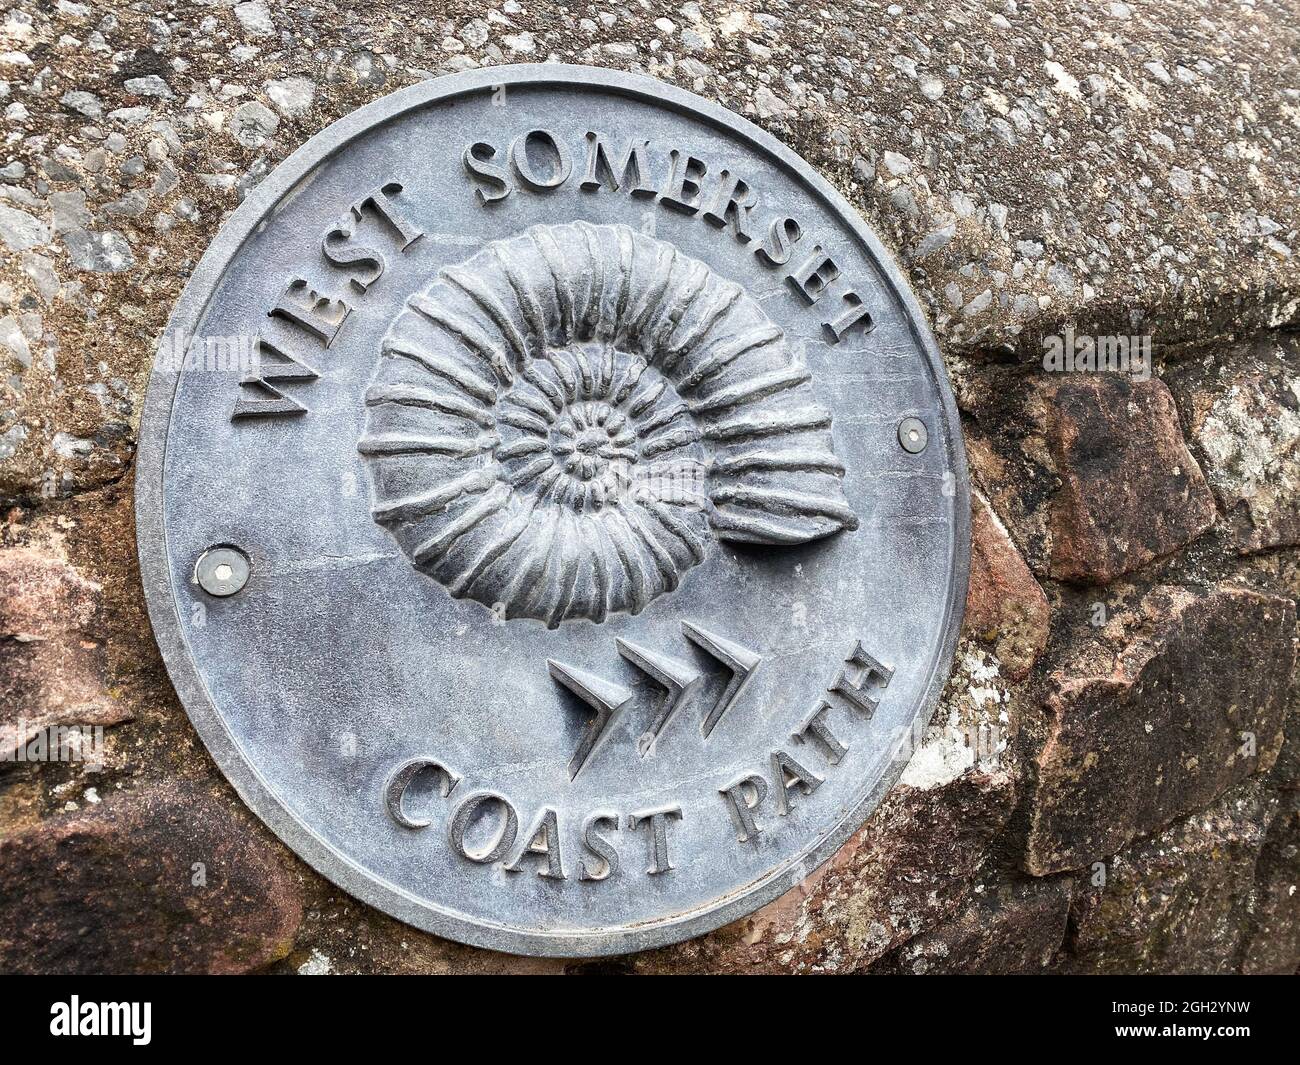 MINEHEAD, UK - August 2021: Sign for the west somerset coast path Stock Photo